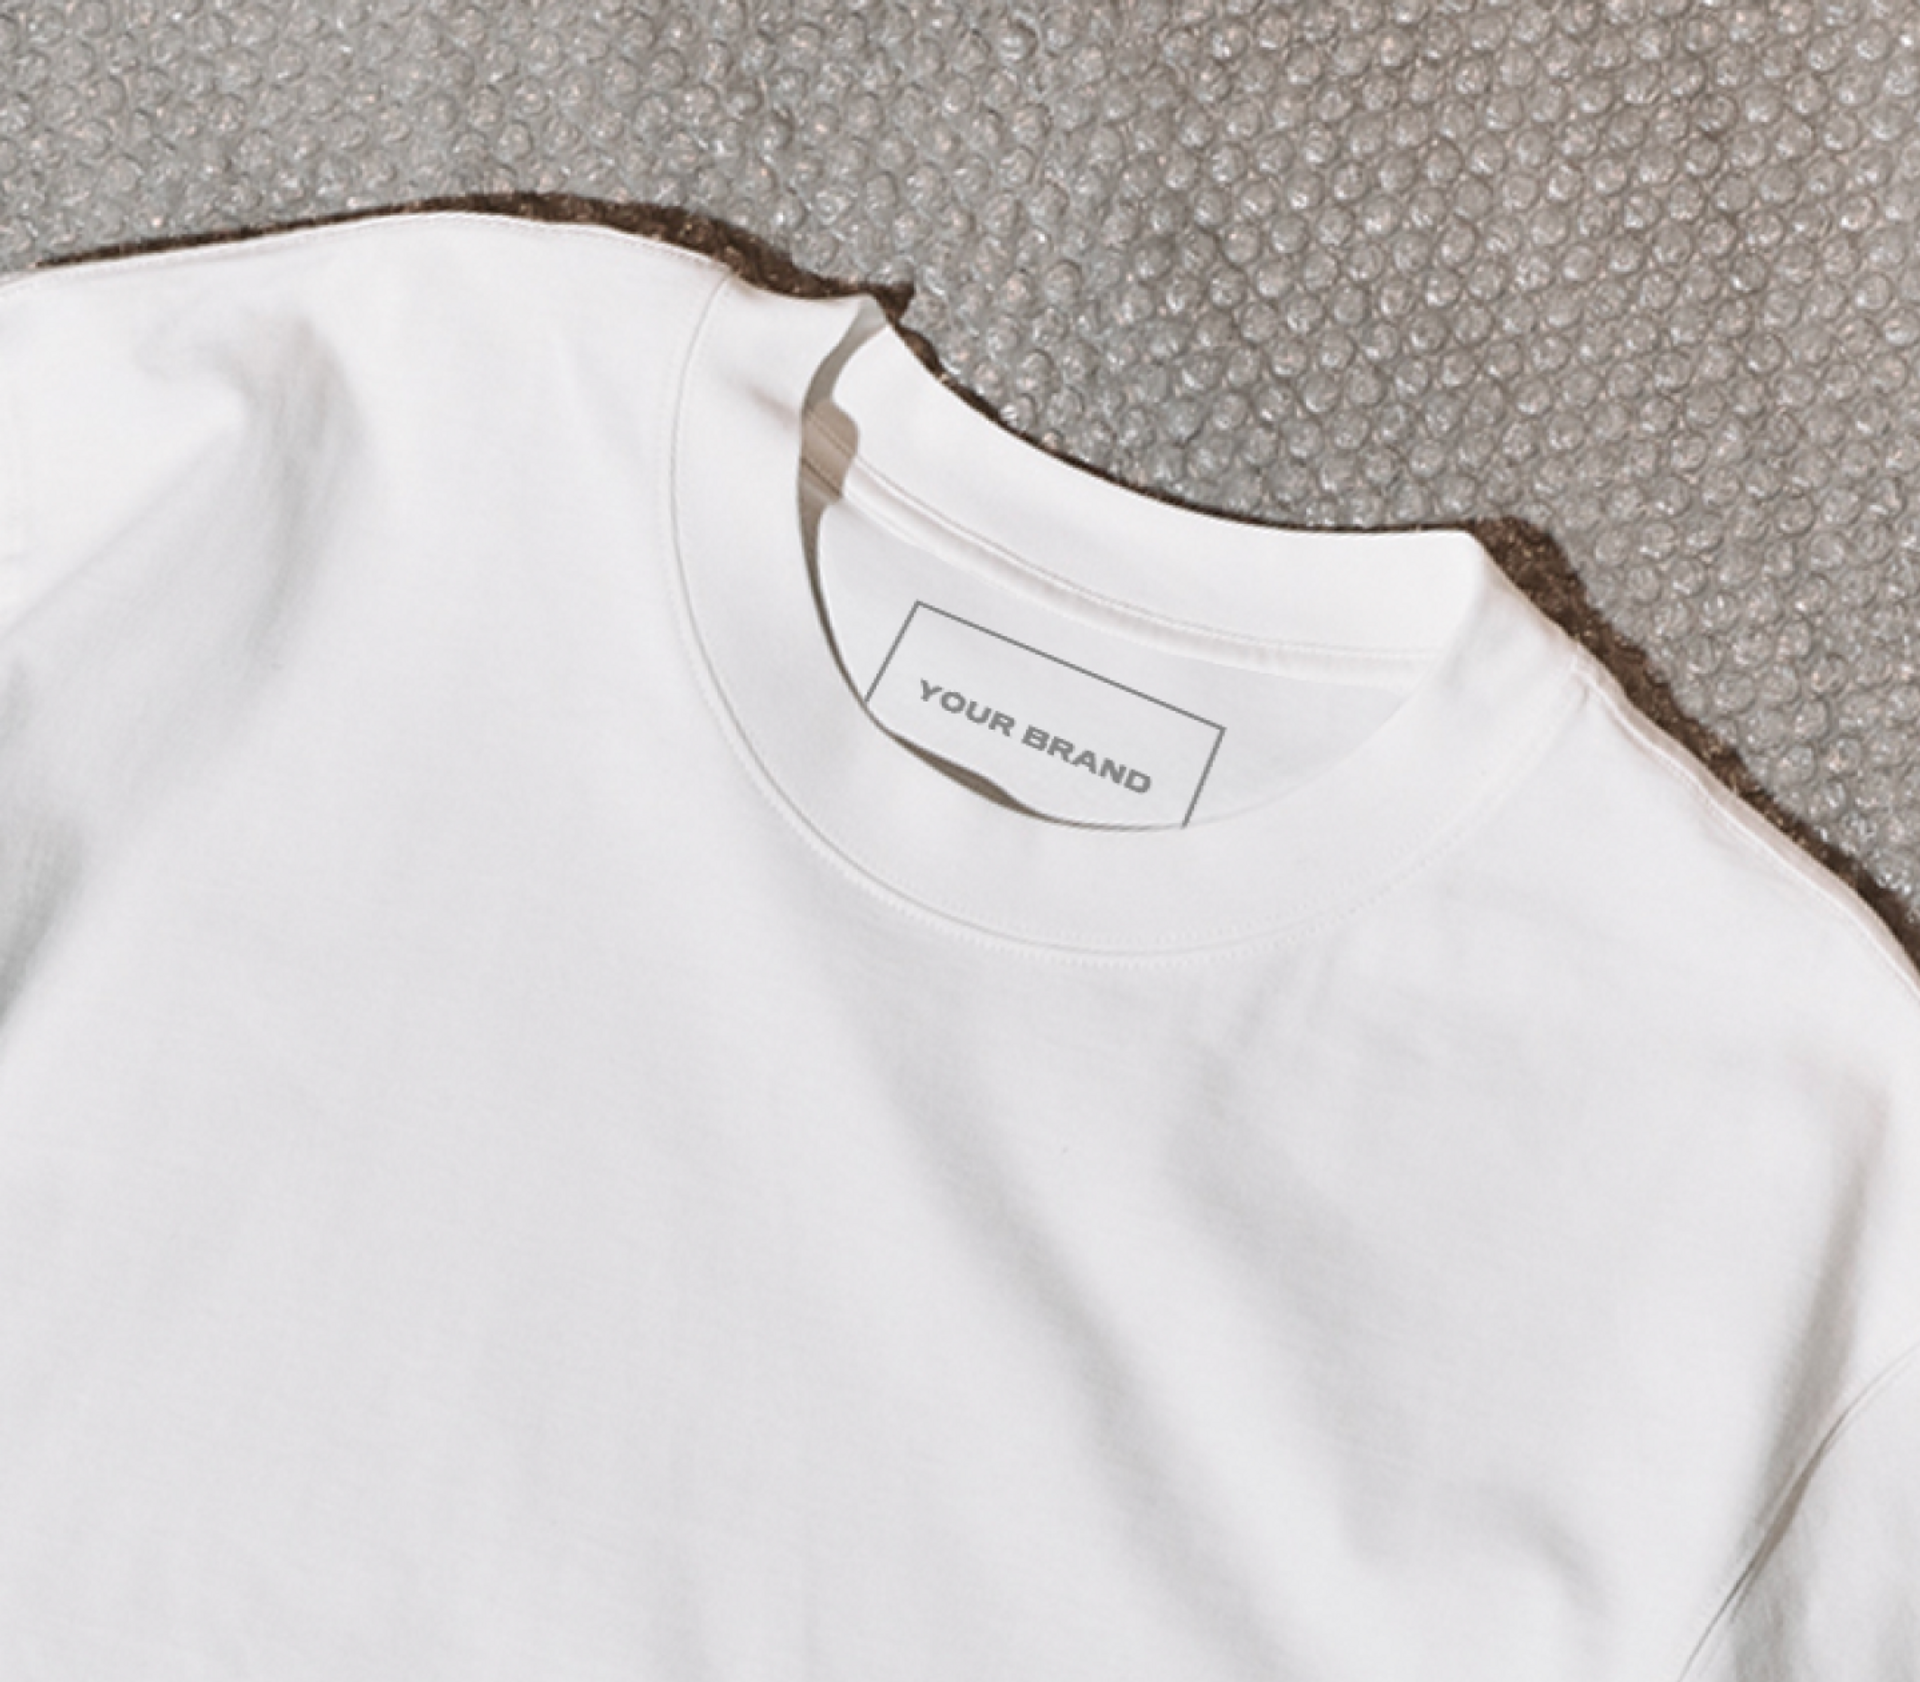 Your brand T-shirt blank